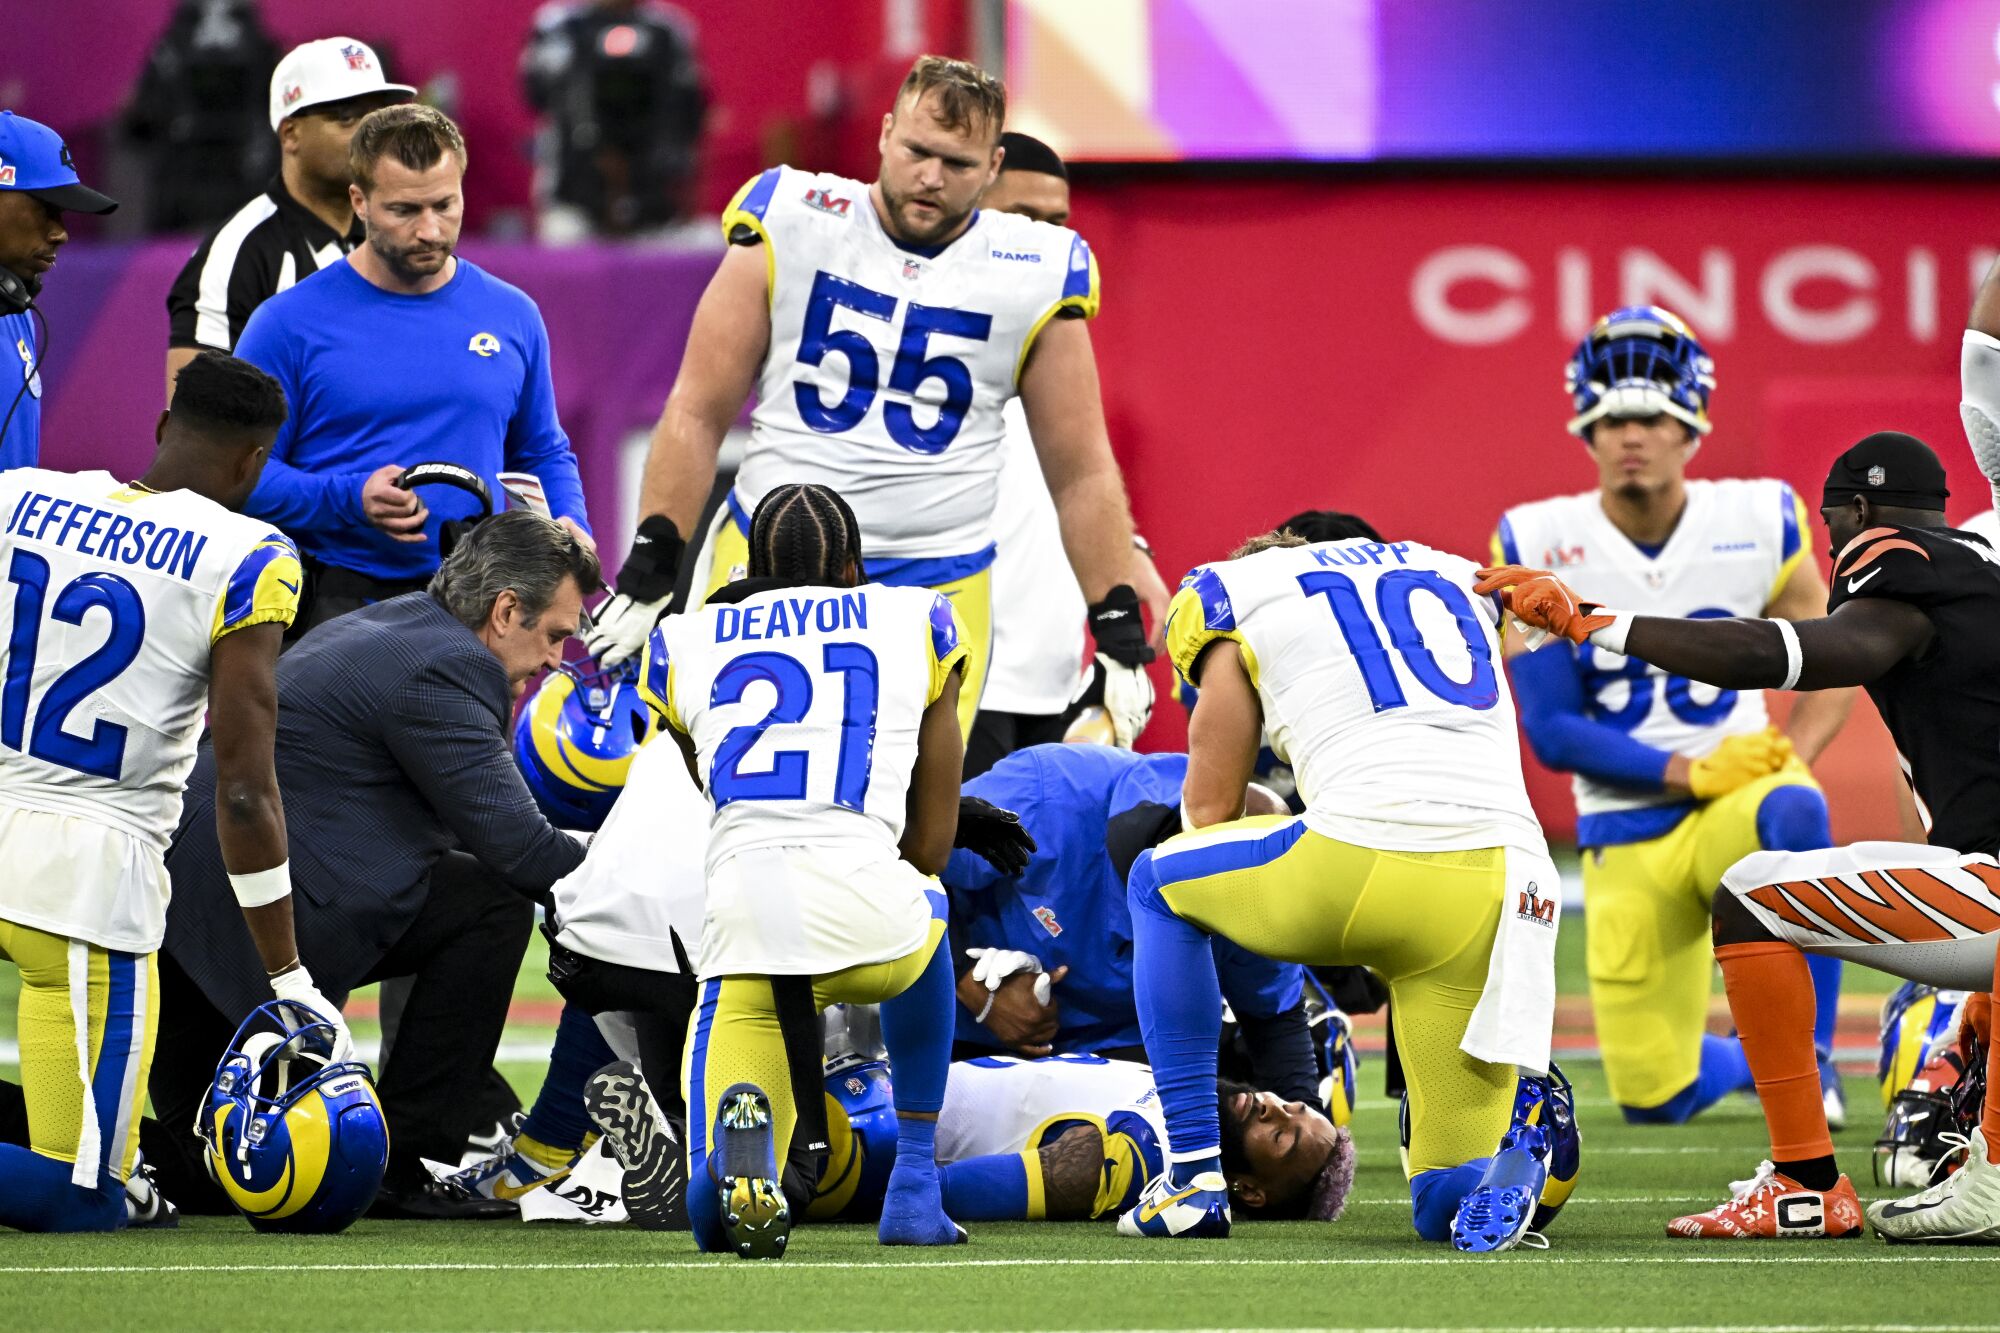  Rams wide receiver Odell Beckham Jr. is tended to after being injured.